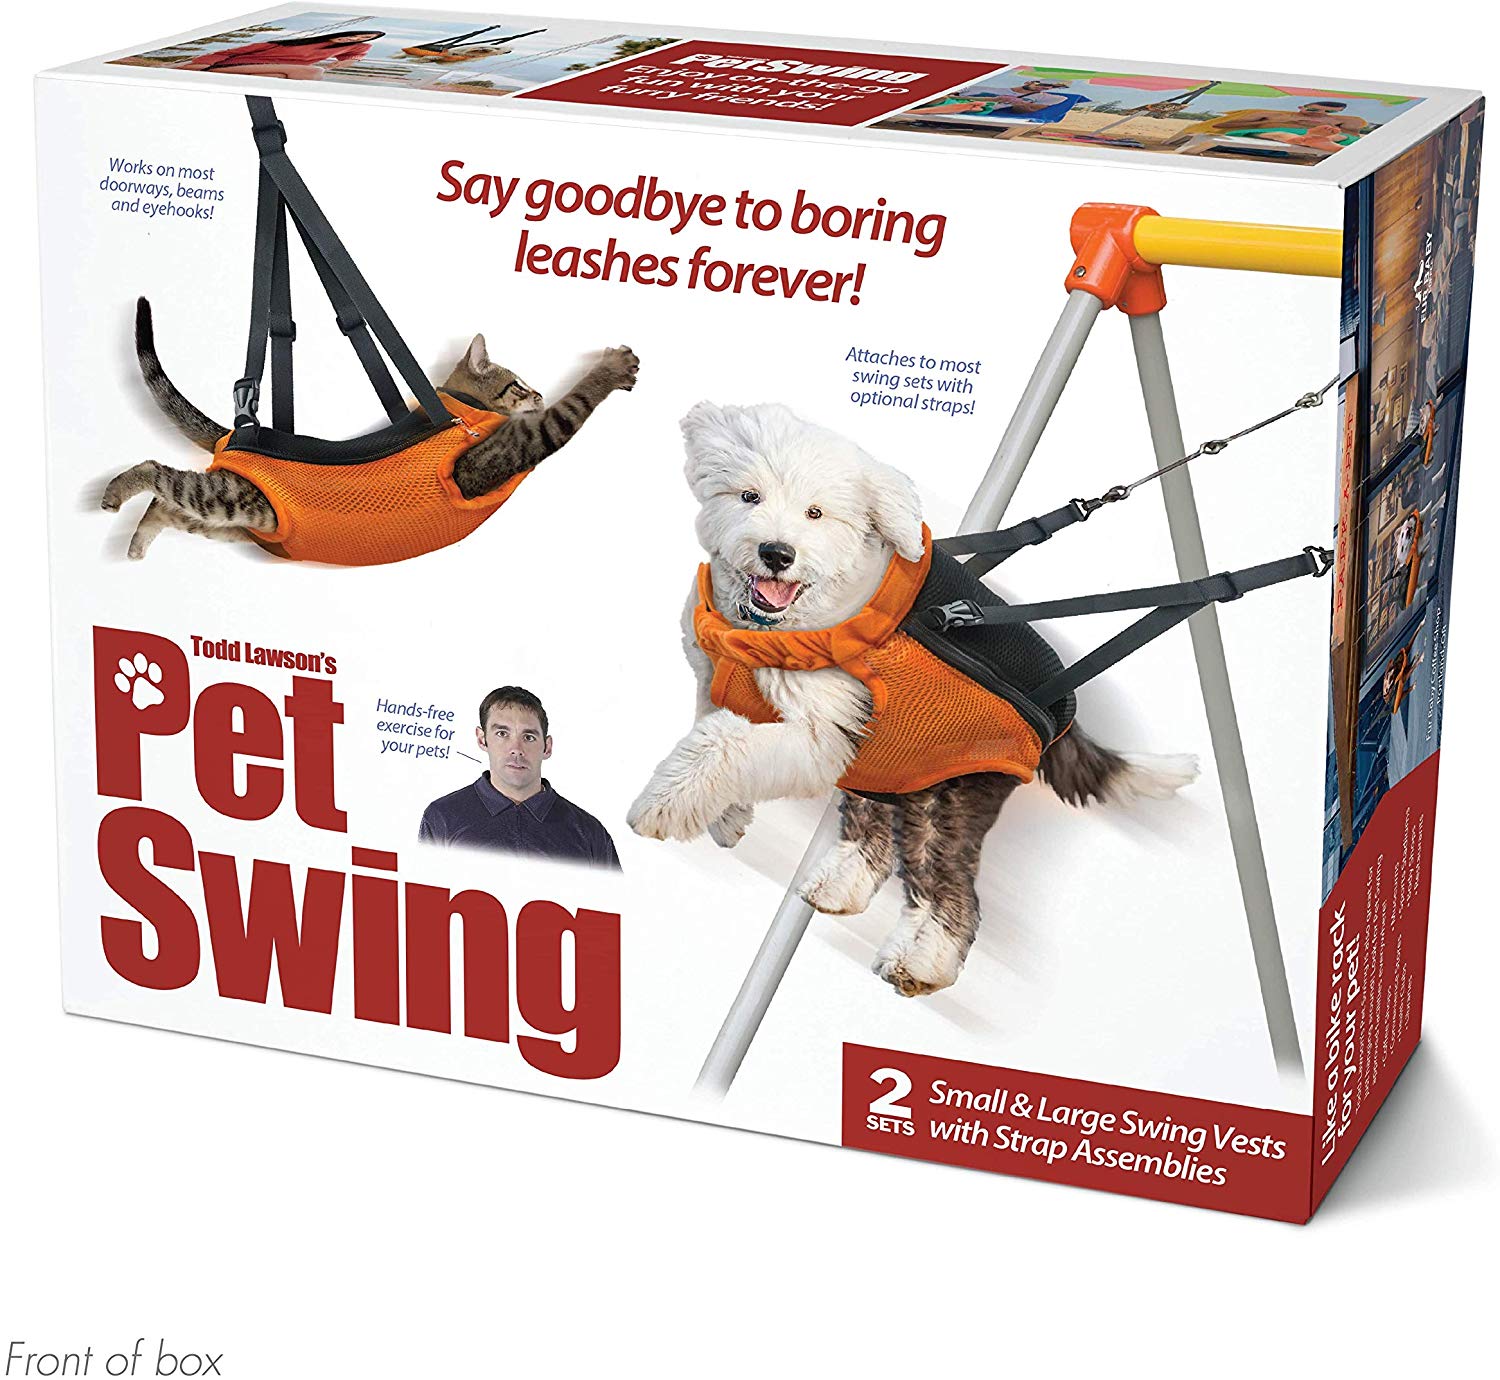 Prank Pack ?Pet Swing? - Wrap Your Real Gift in a Prank Funny Gag Joke Gift Box